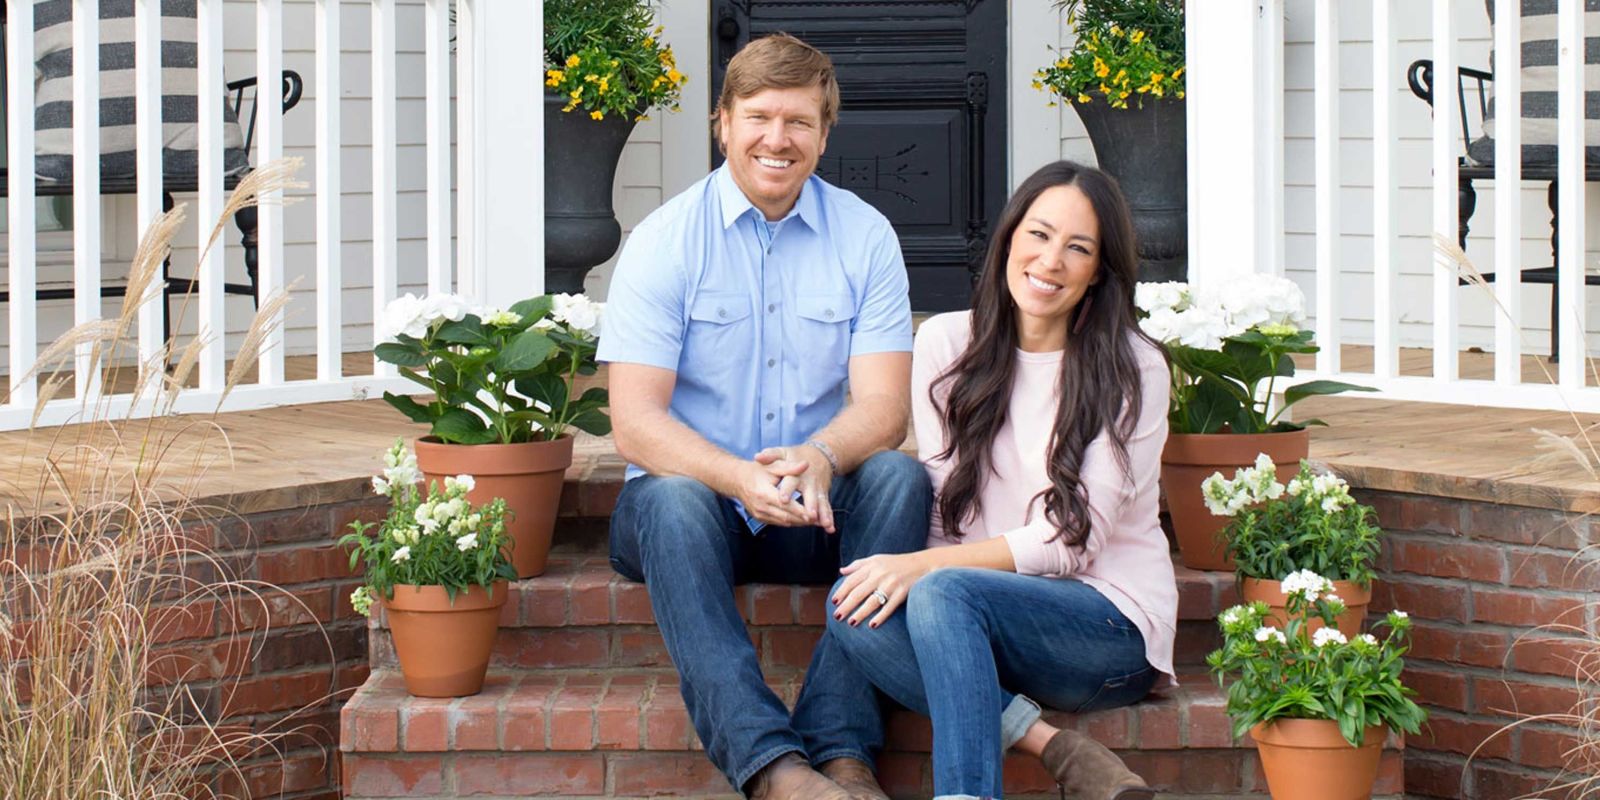 Why Chip and Joanna Gaines Are the Most Admirable Couple on TV